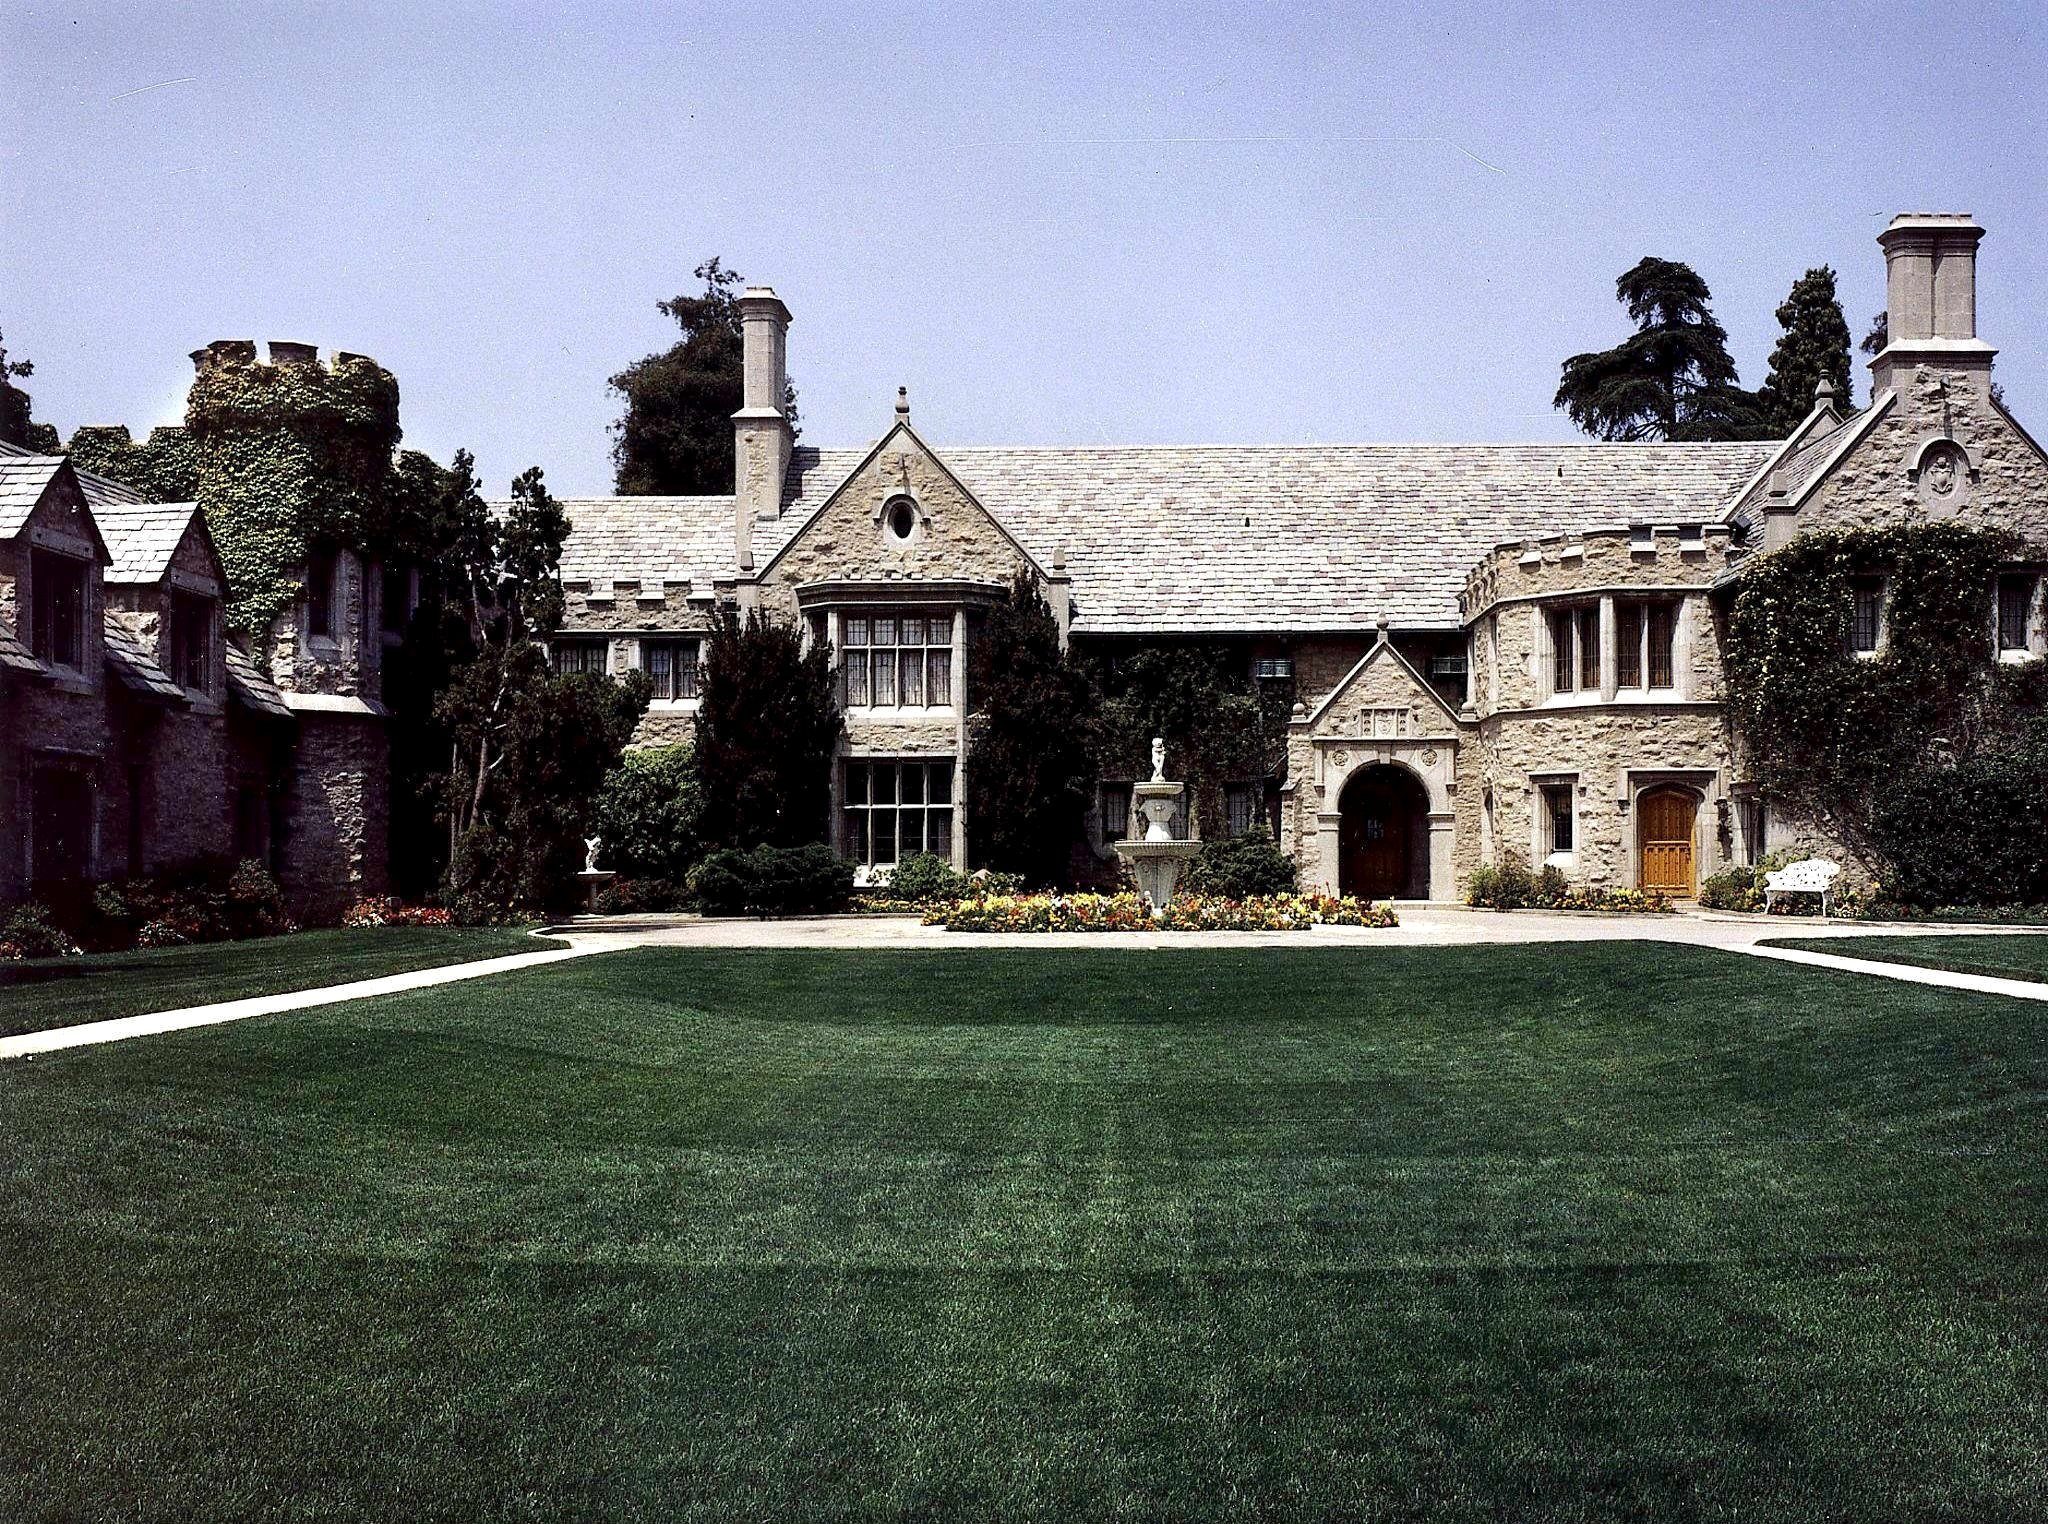 Playboy Mansion sold to Twinkies owner